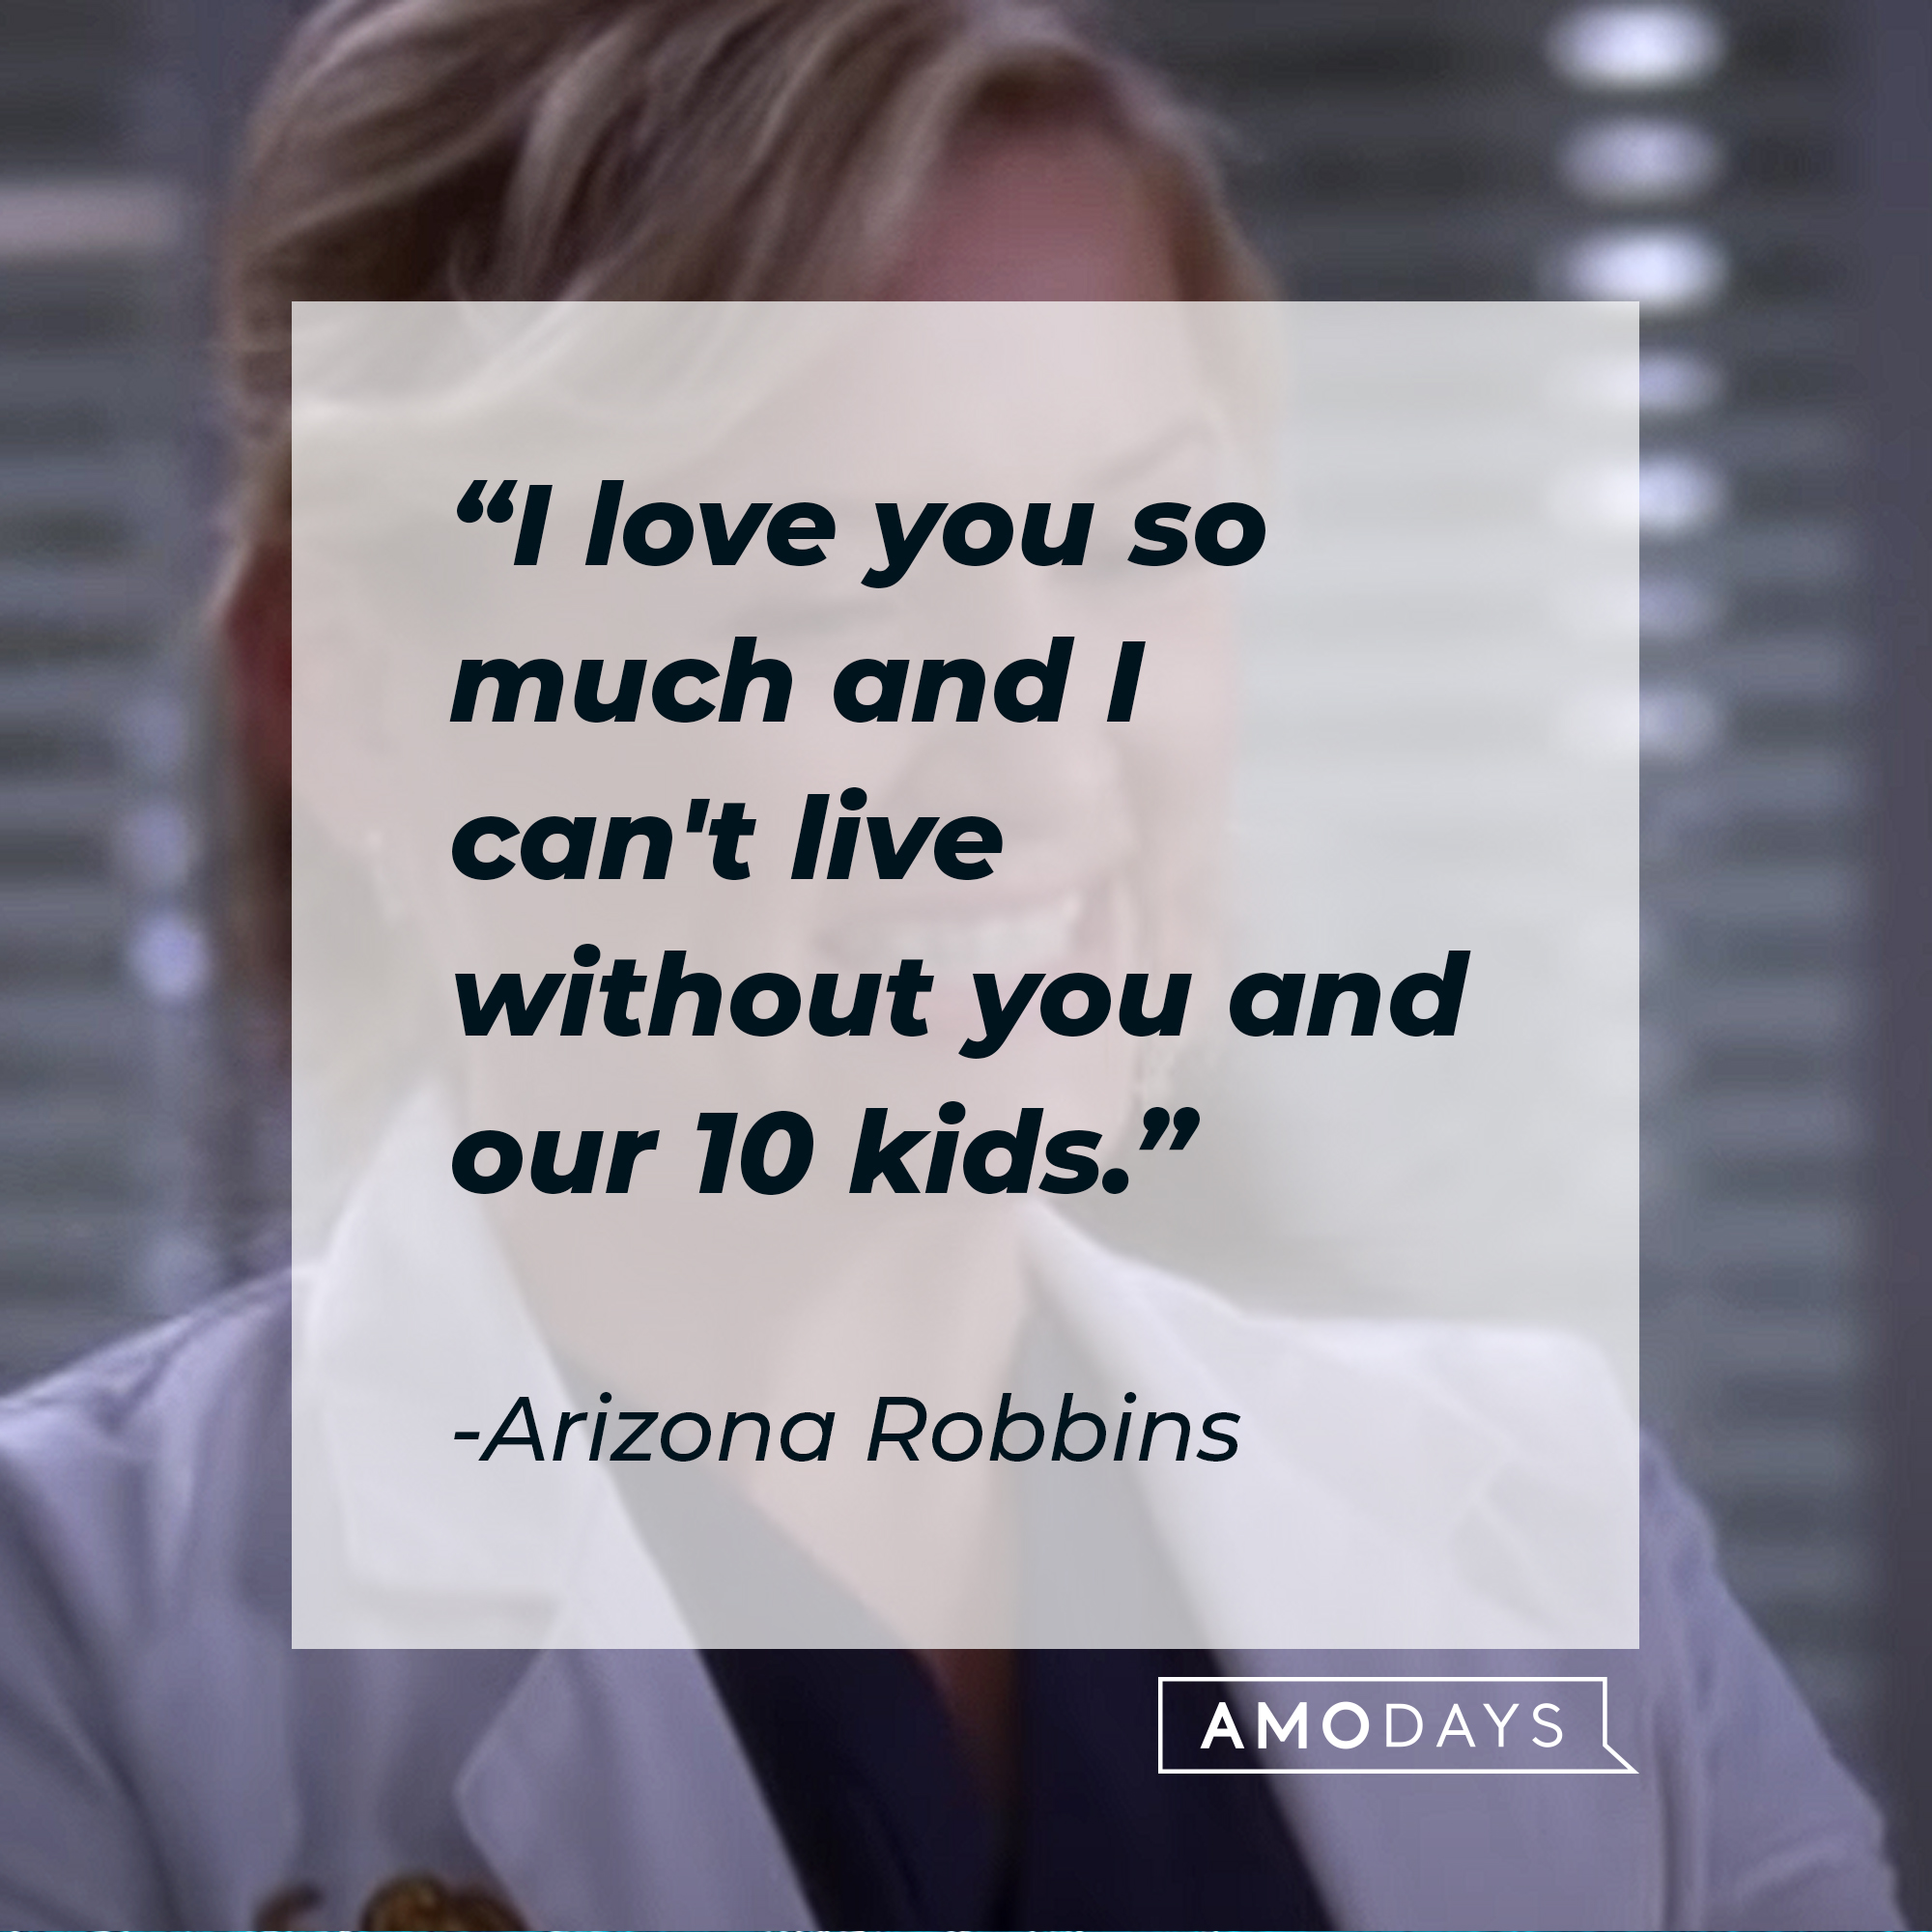 A picture of Arizona Robbins with her quote:"I love you so much and I can't live without you and our 10 kids." | Image: AmoDays